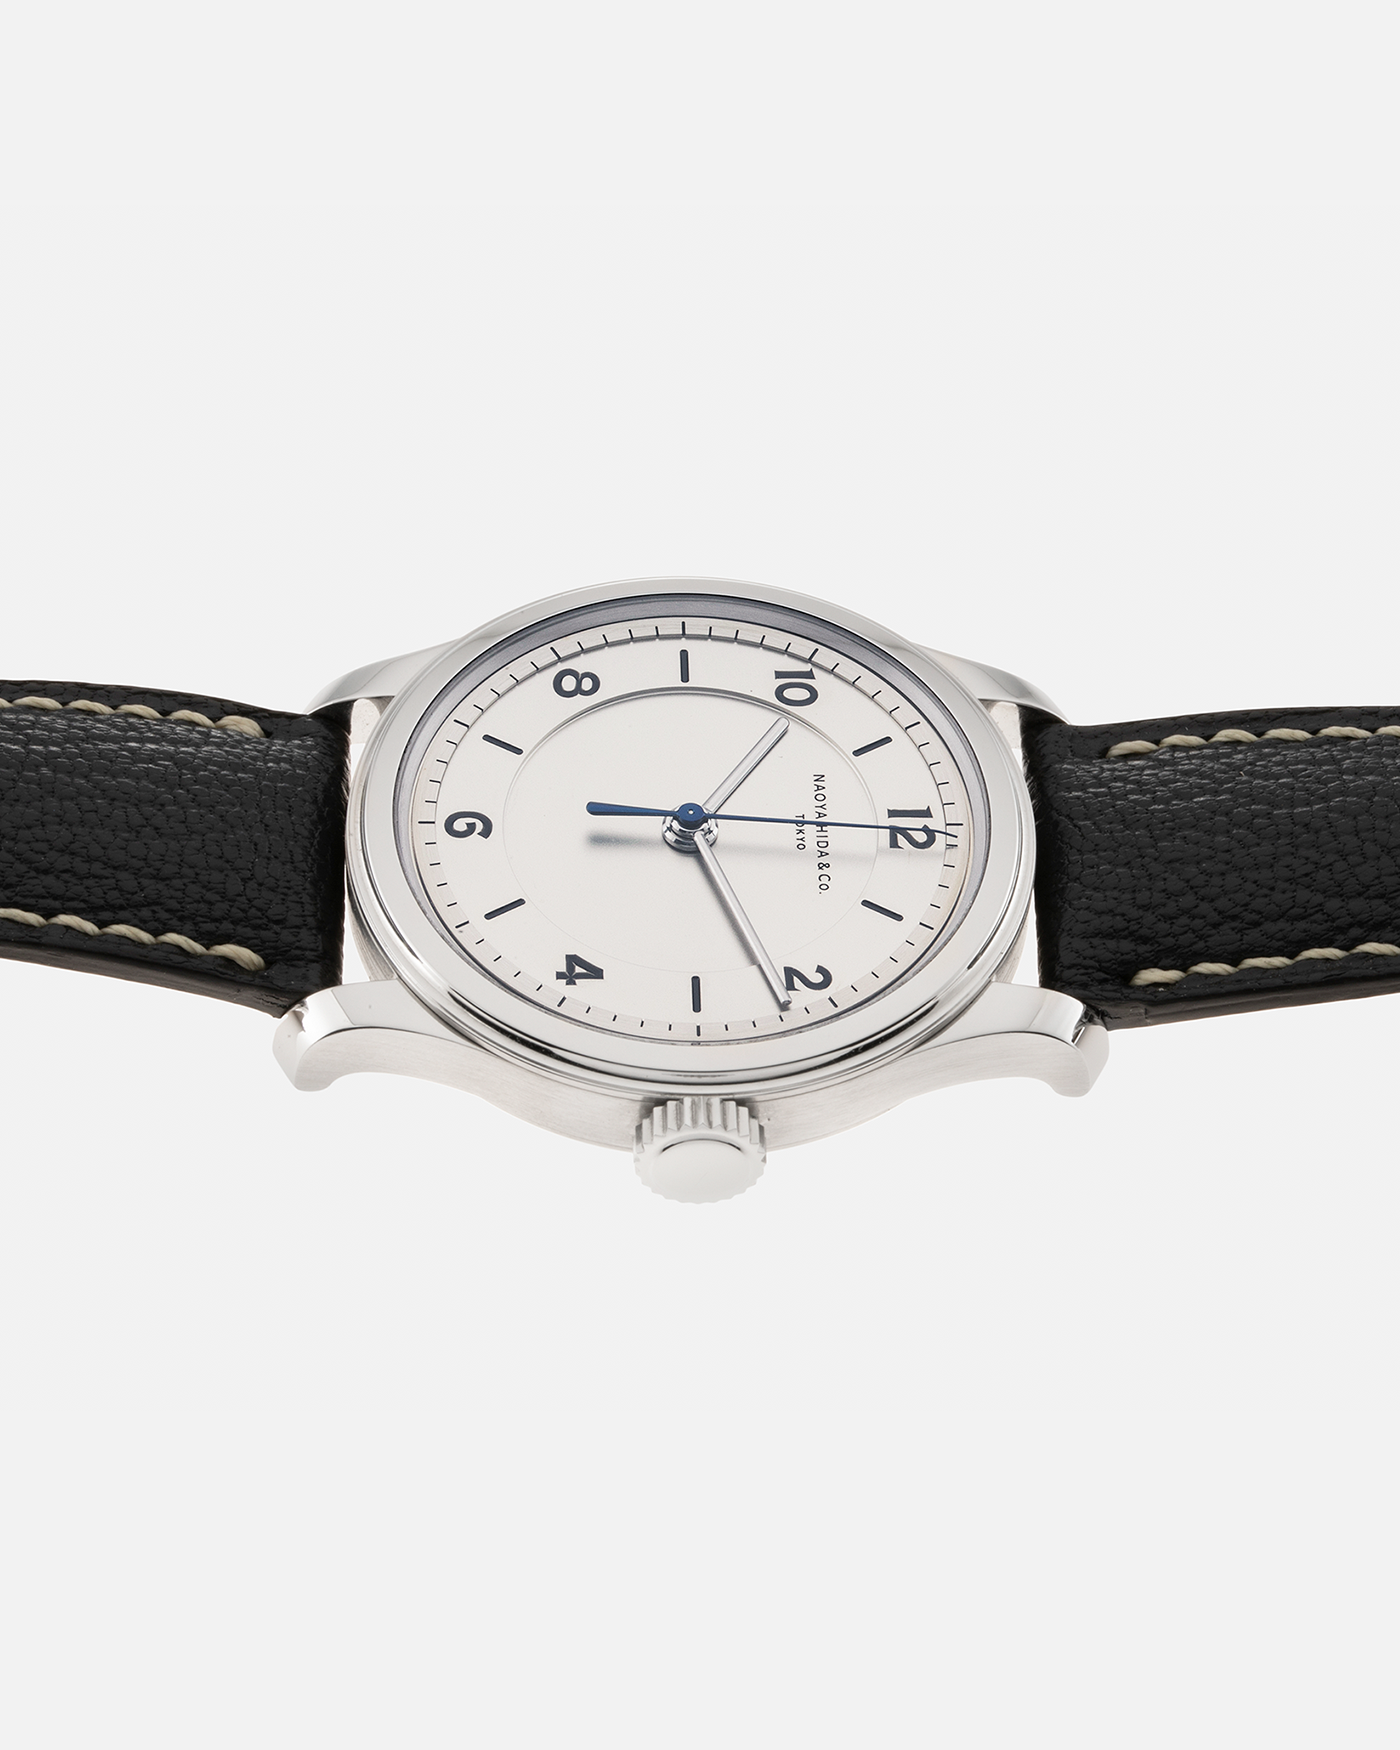 Brand: Naoya Hida Year: 2022 Model: NH Type 2B Material: 904L Stainless Steel Case, German Silver Dial  Movement: Cal. 3020CS, Manual-Winding Case Diameter: 37mm Strap: Naoya Hida (Jean Rousseau) Navy Blue Leather Strap with Contrasting Stitching and Signed Stainless Steel Tang Buckle